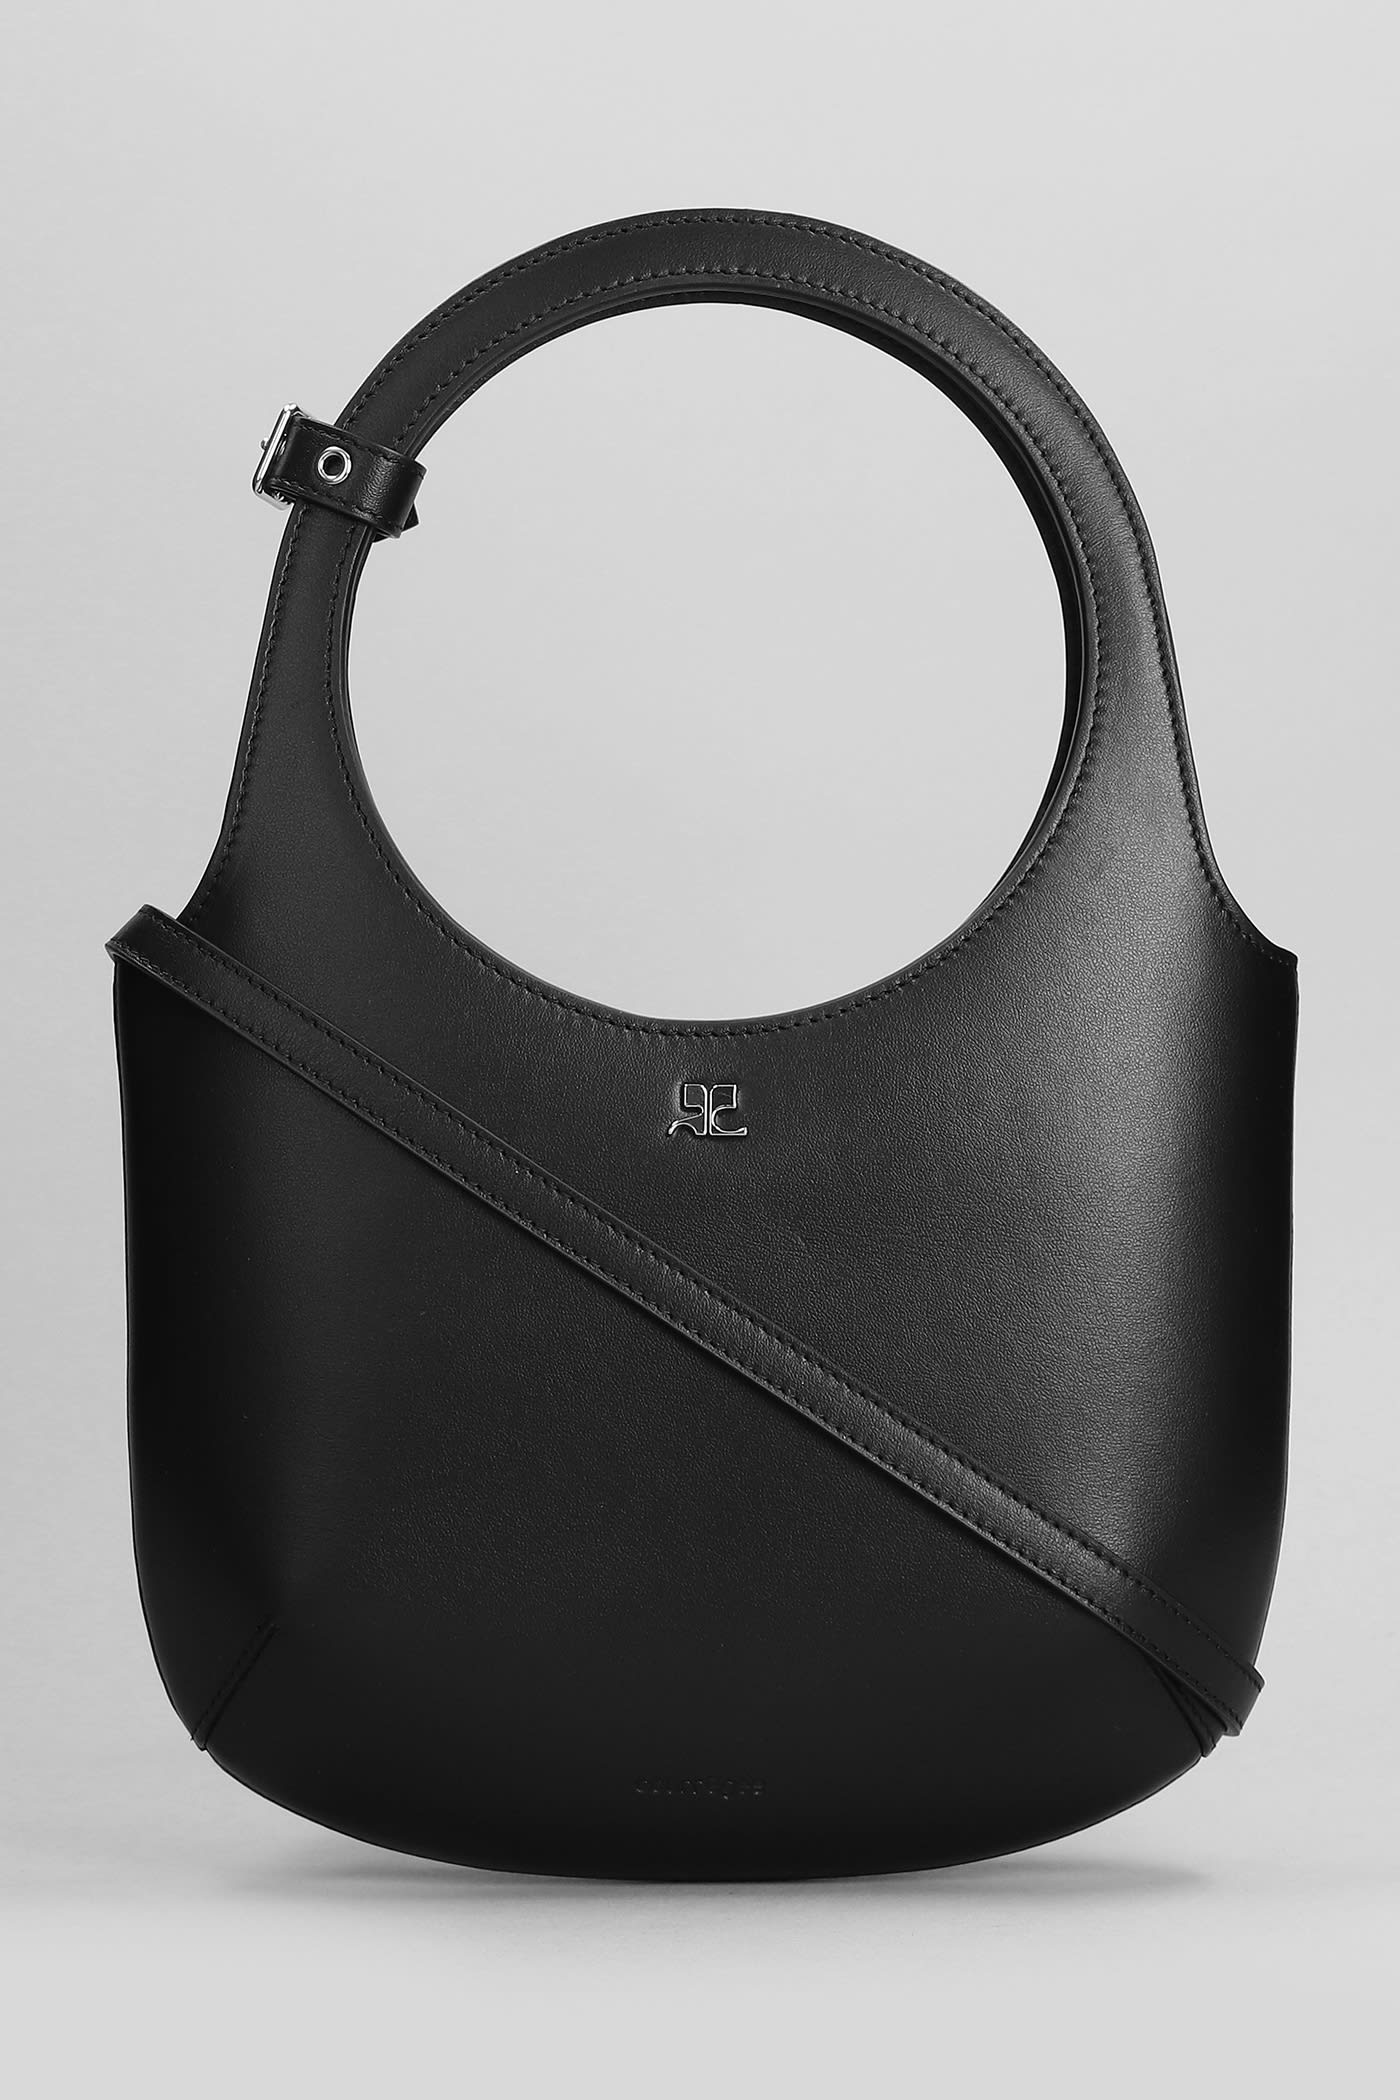 Courrèges Hand Bag In Black Leather